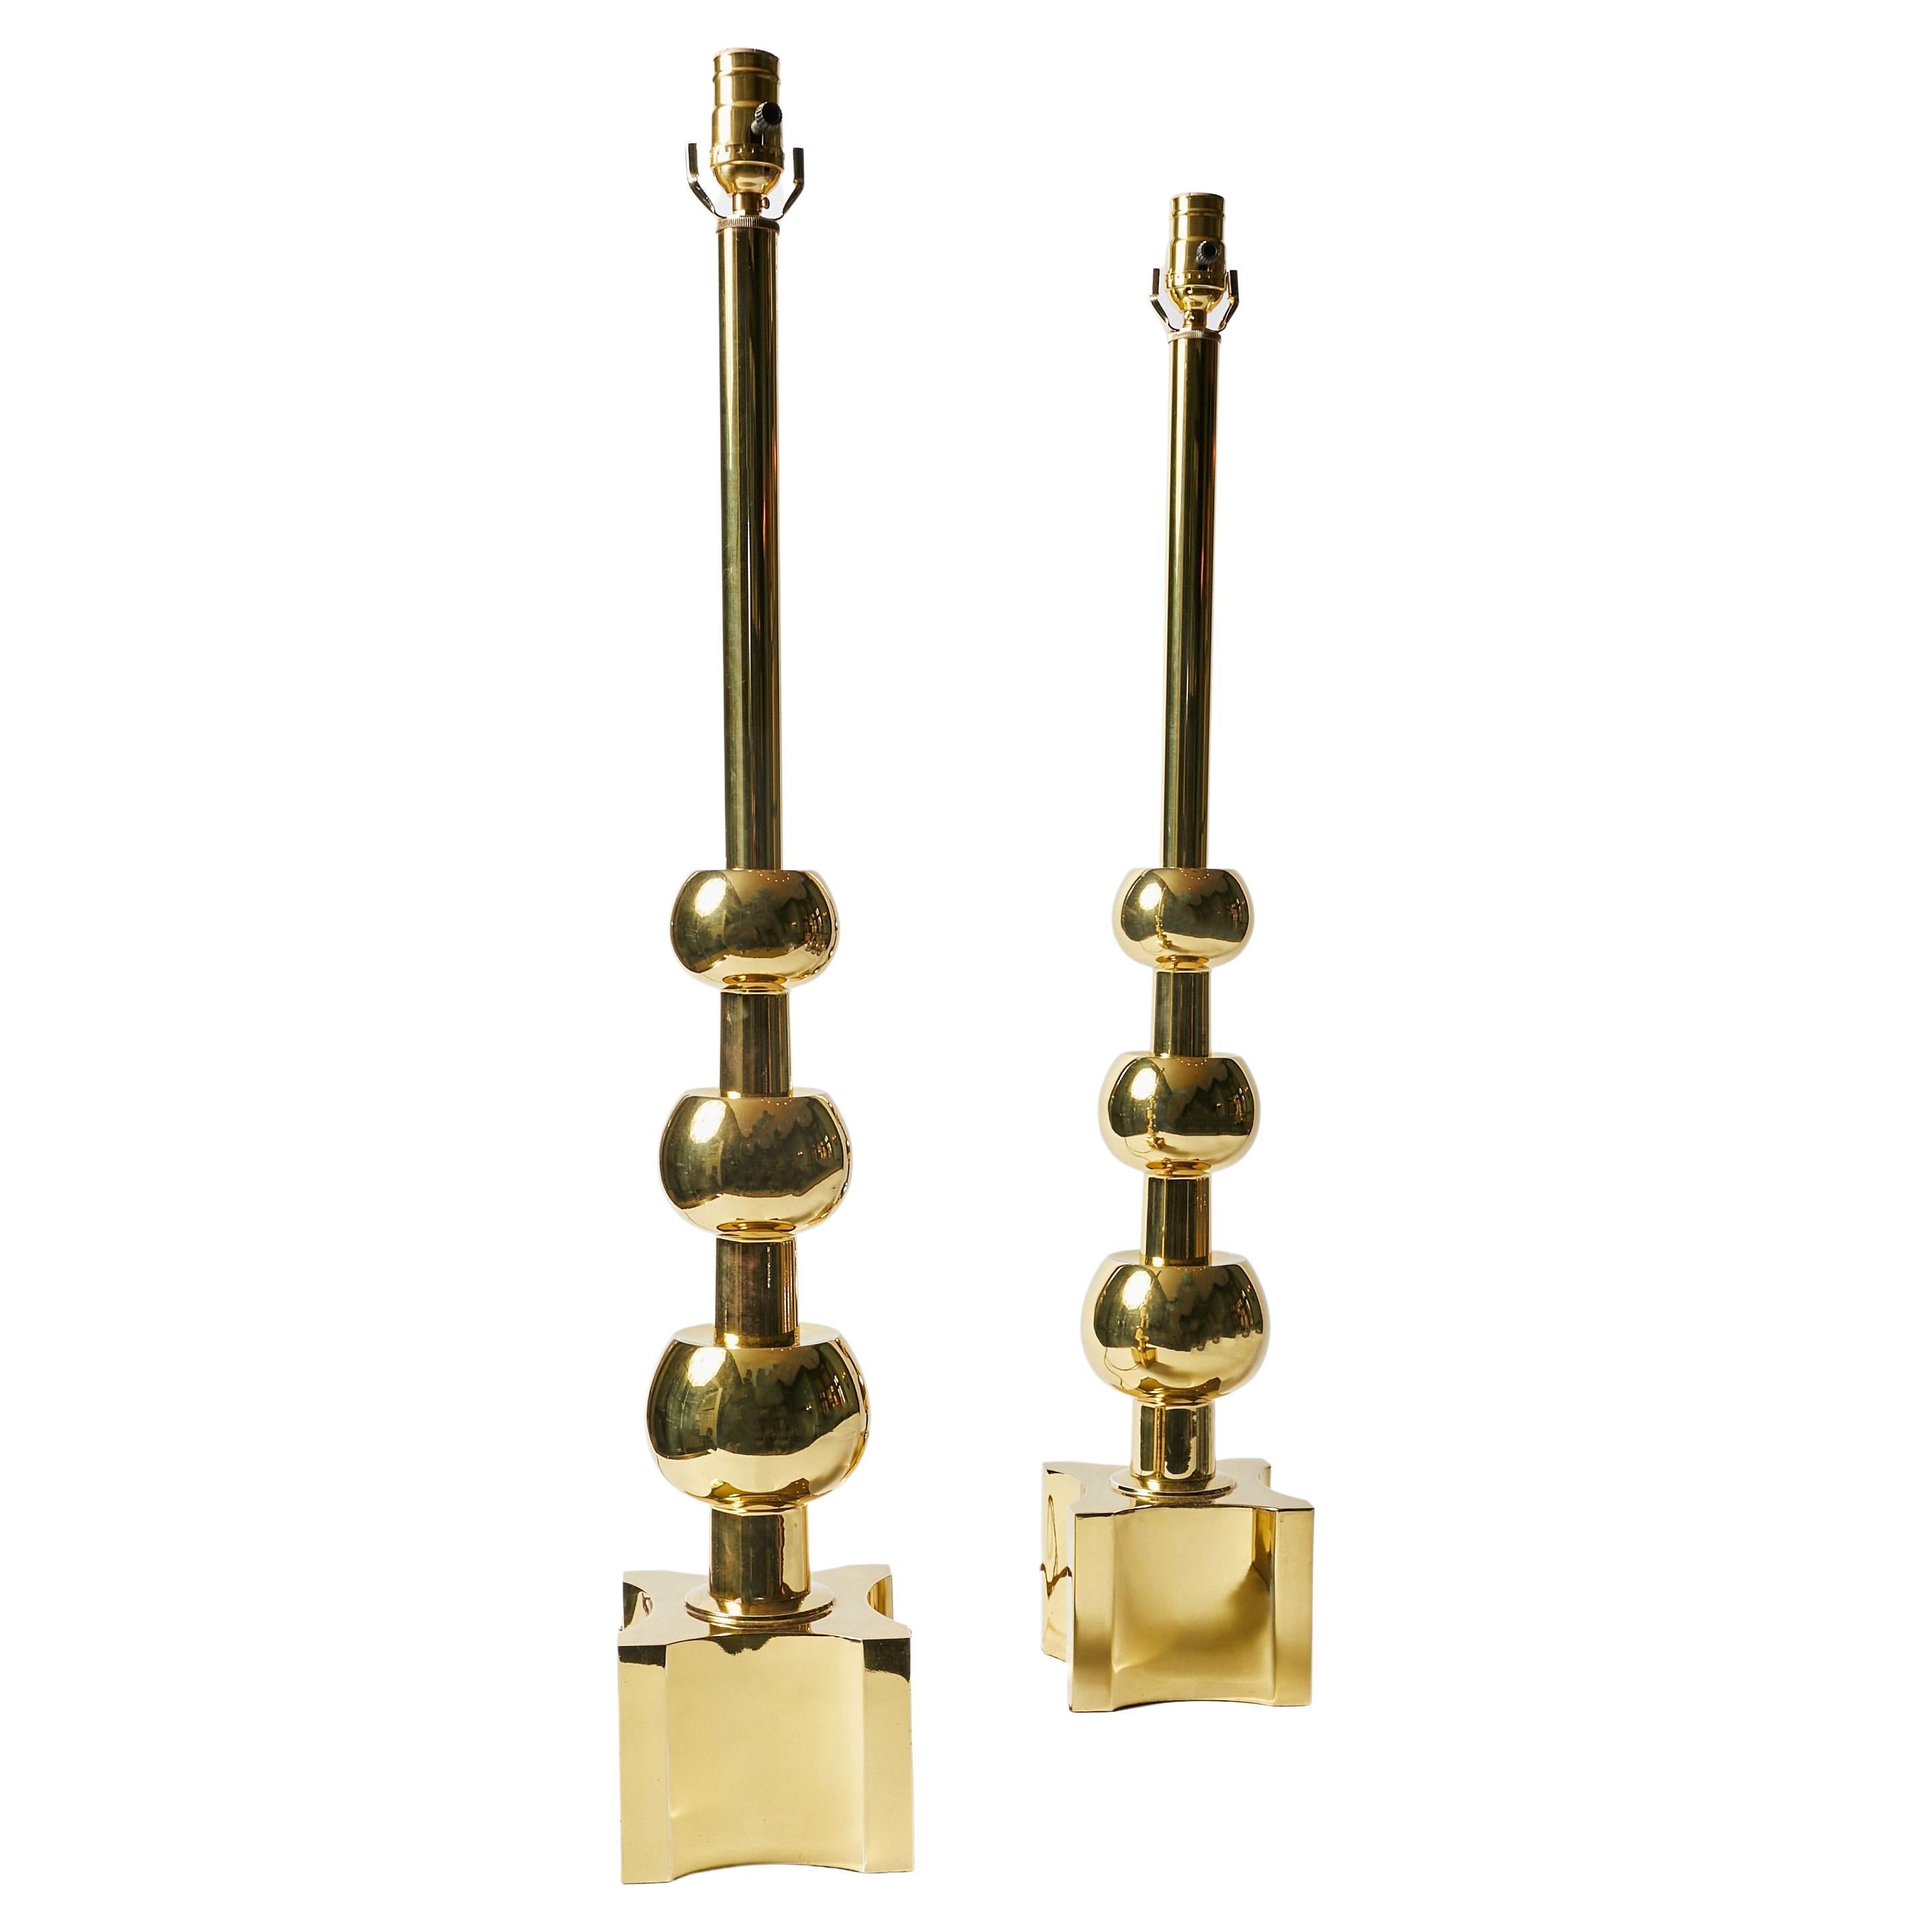 Pair of Modernist Brass Lamps by Tommi Parzinger